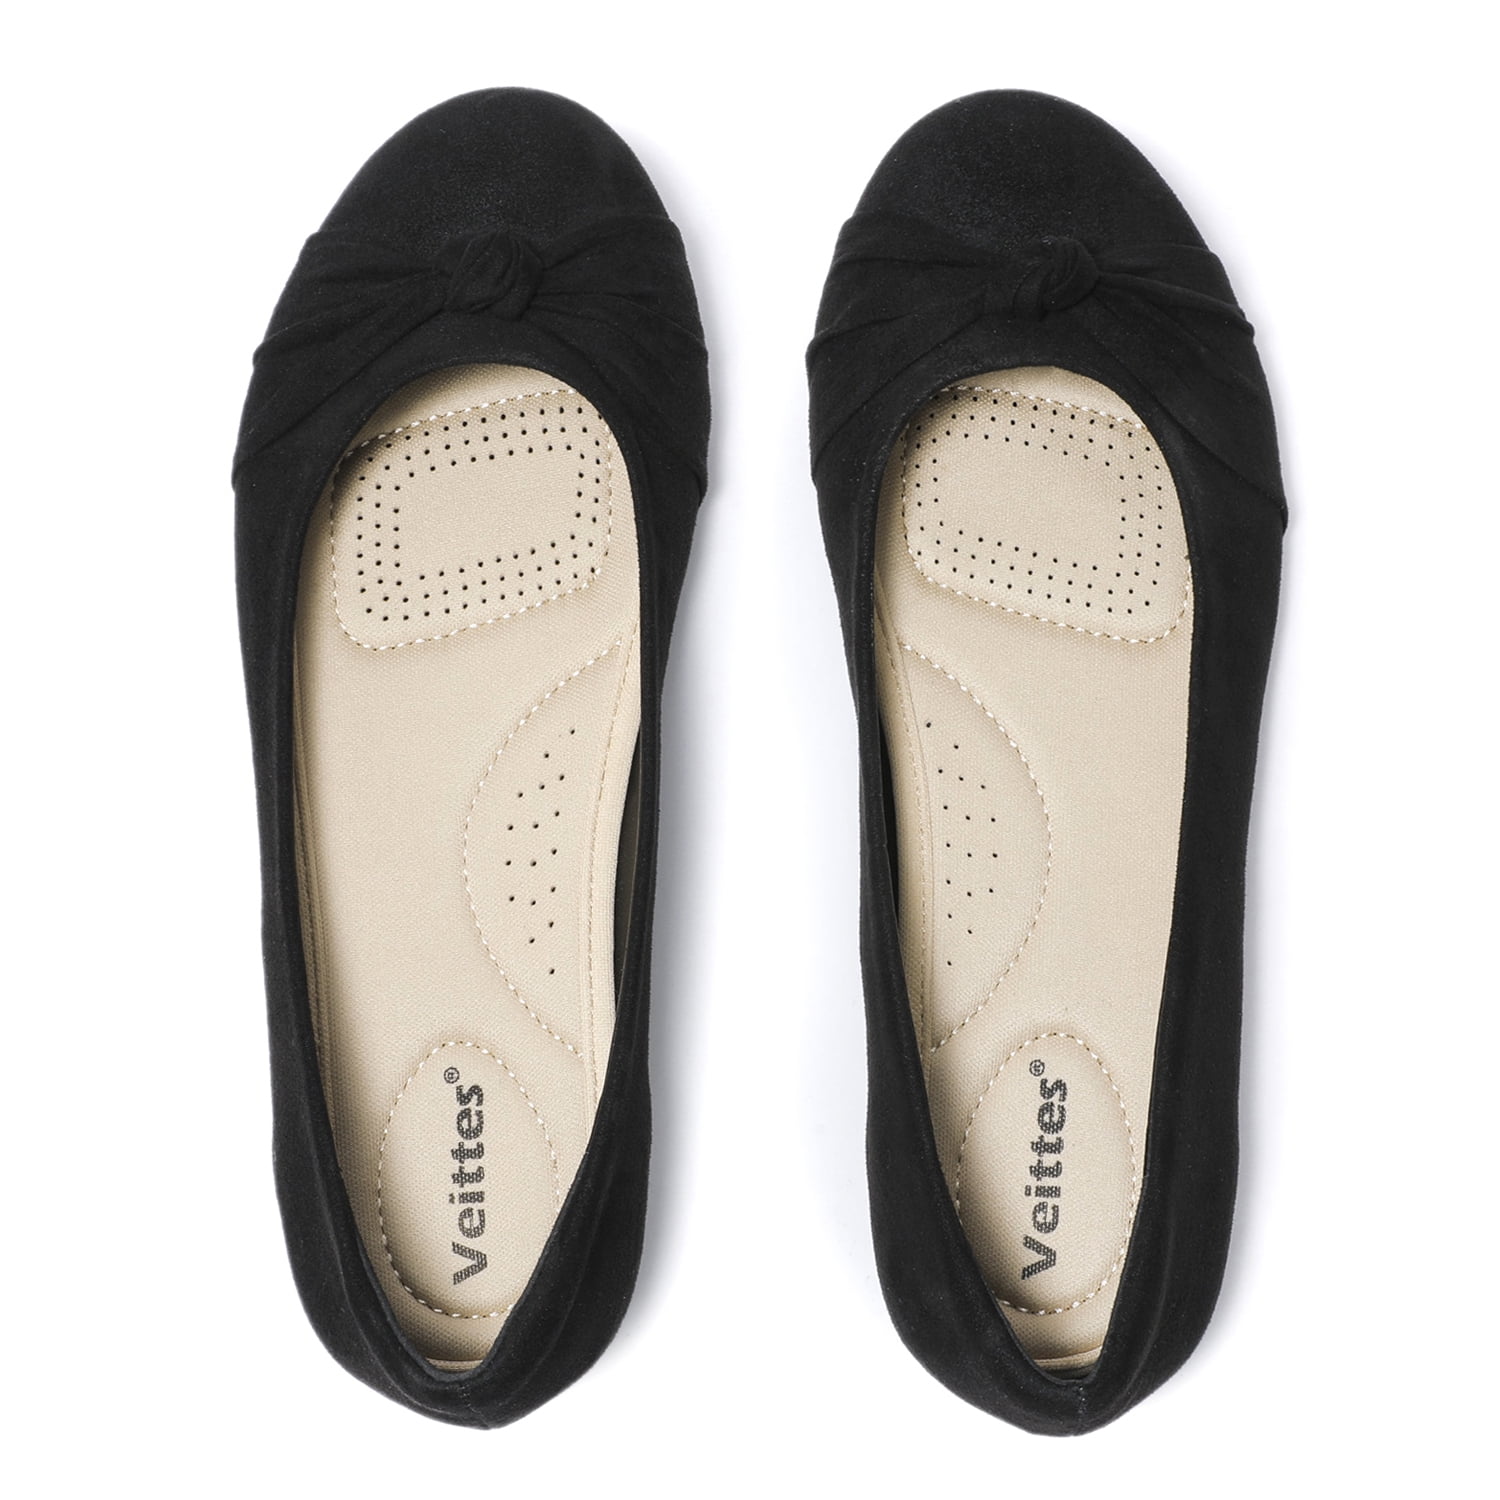 Ataiwee Women's Wide Flat Shoes，Classic Round Toe Slip on Wide Ballet Shoes. 